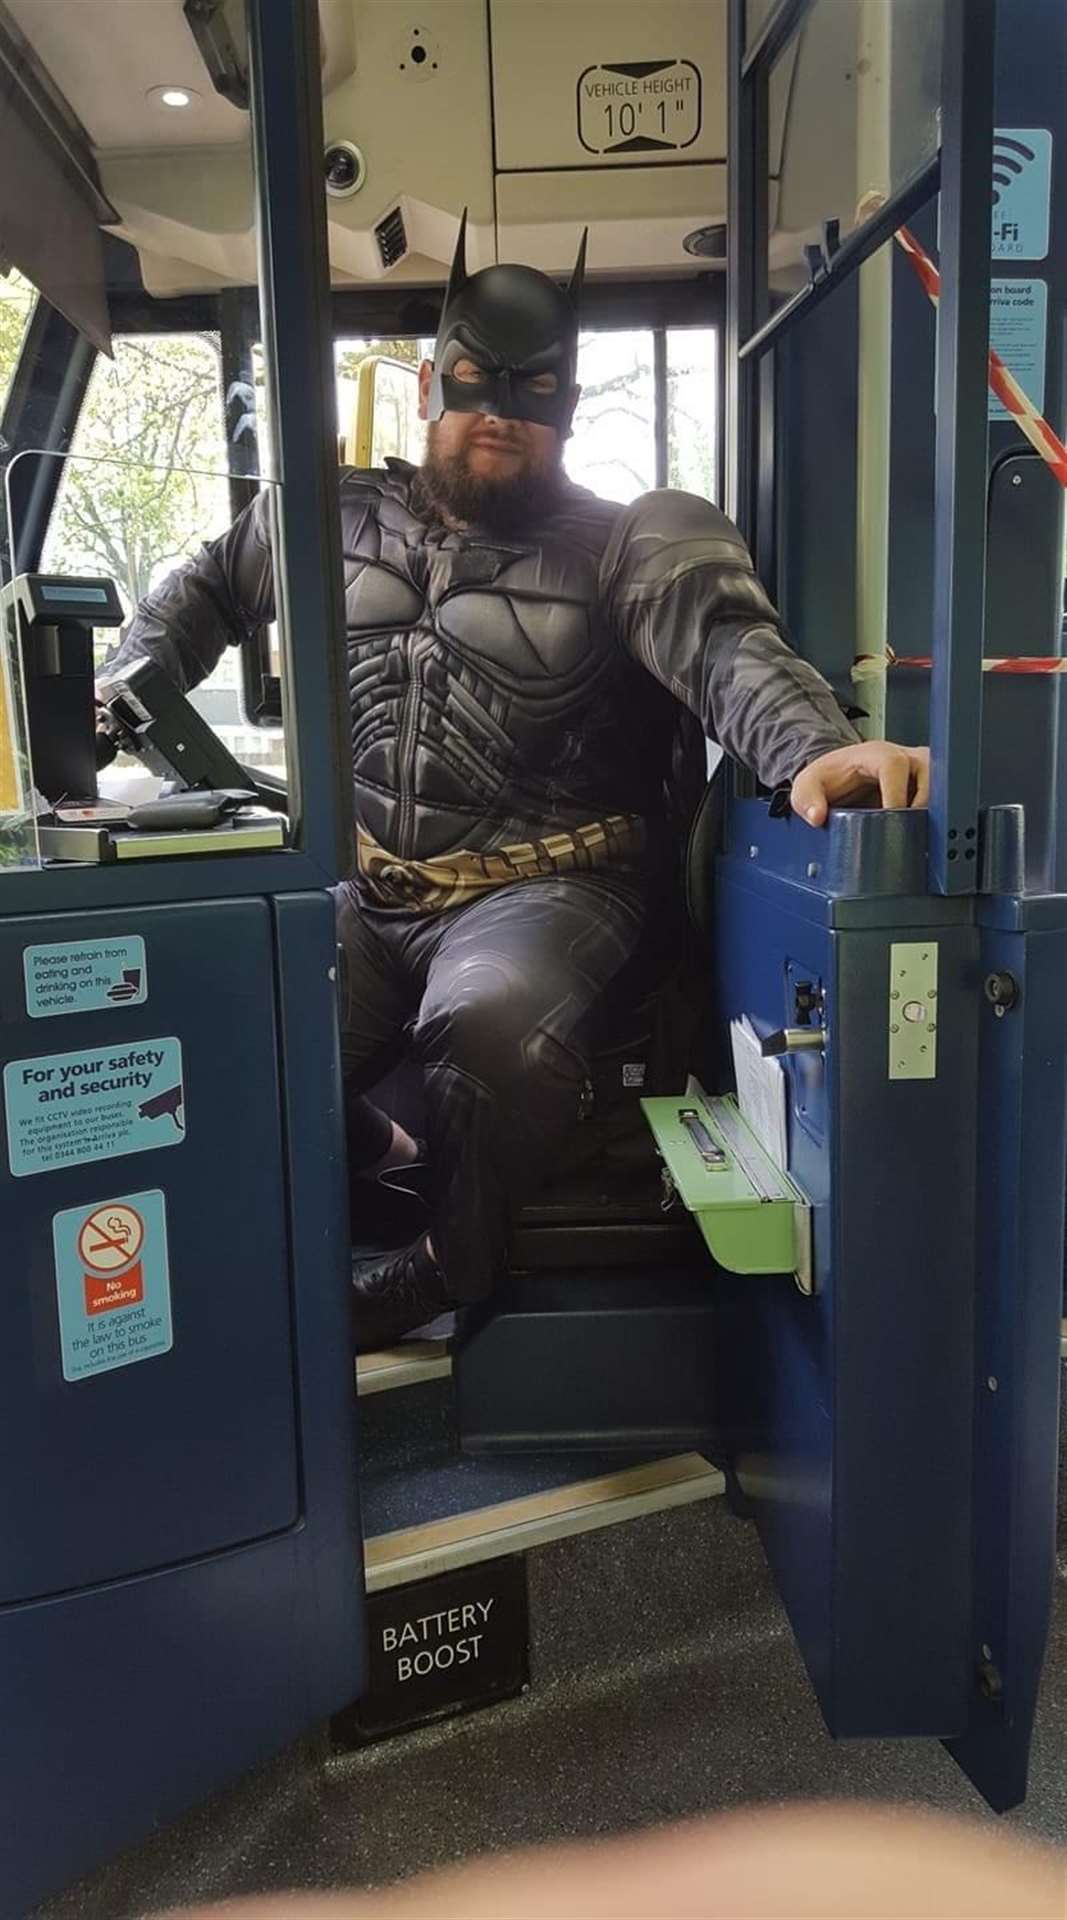 Chatham residents were driven around by Batman on a bus last week